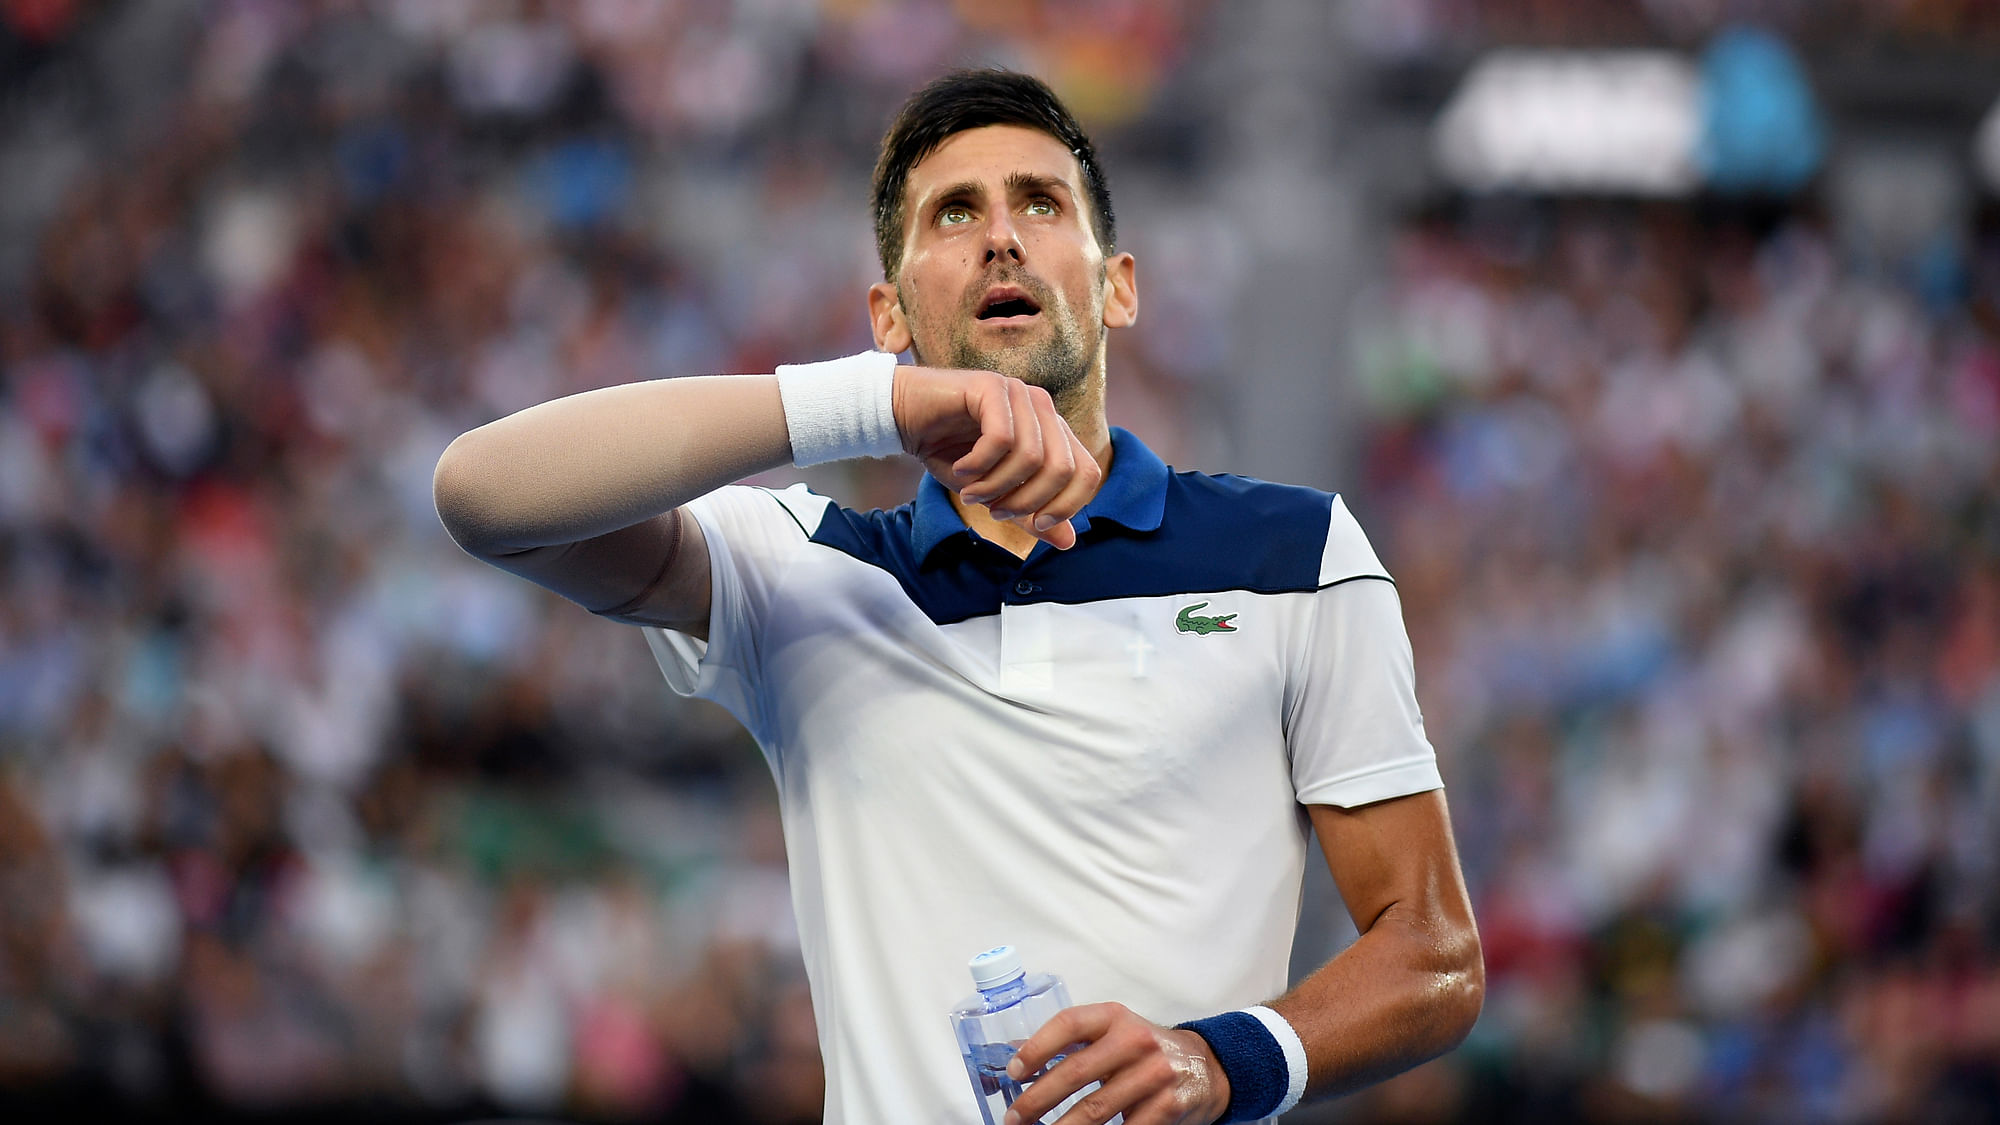 <div class="paragraphs"><p>Novak Djokovic's visa has been cancelled on 'health and good order grounds'.</p></div>